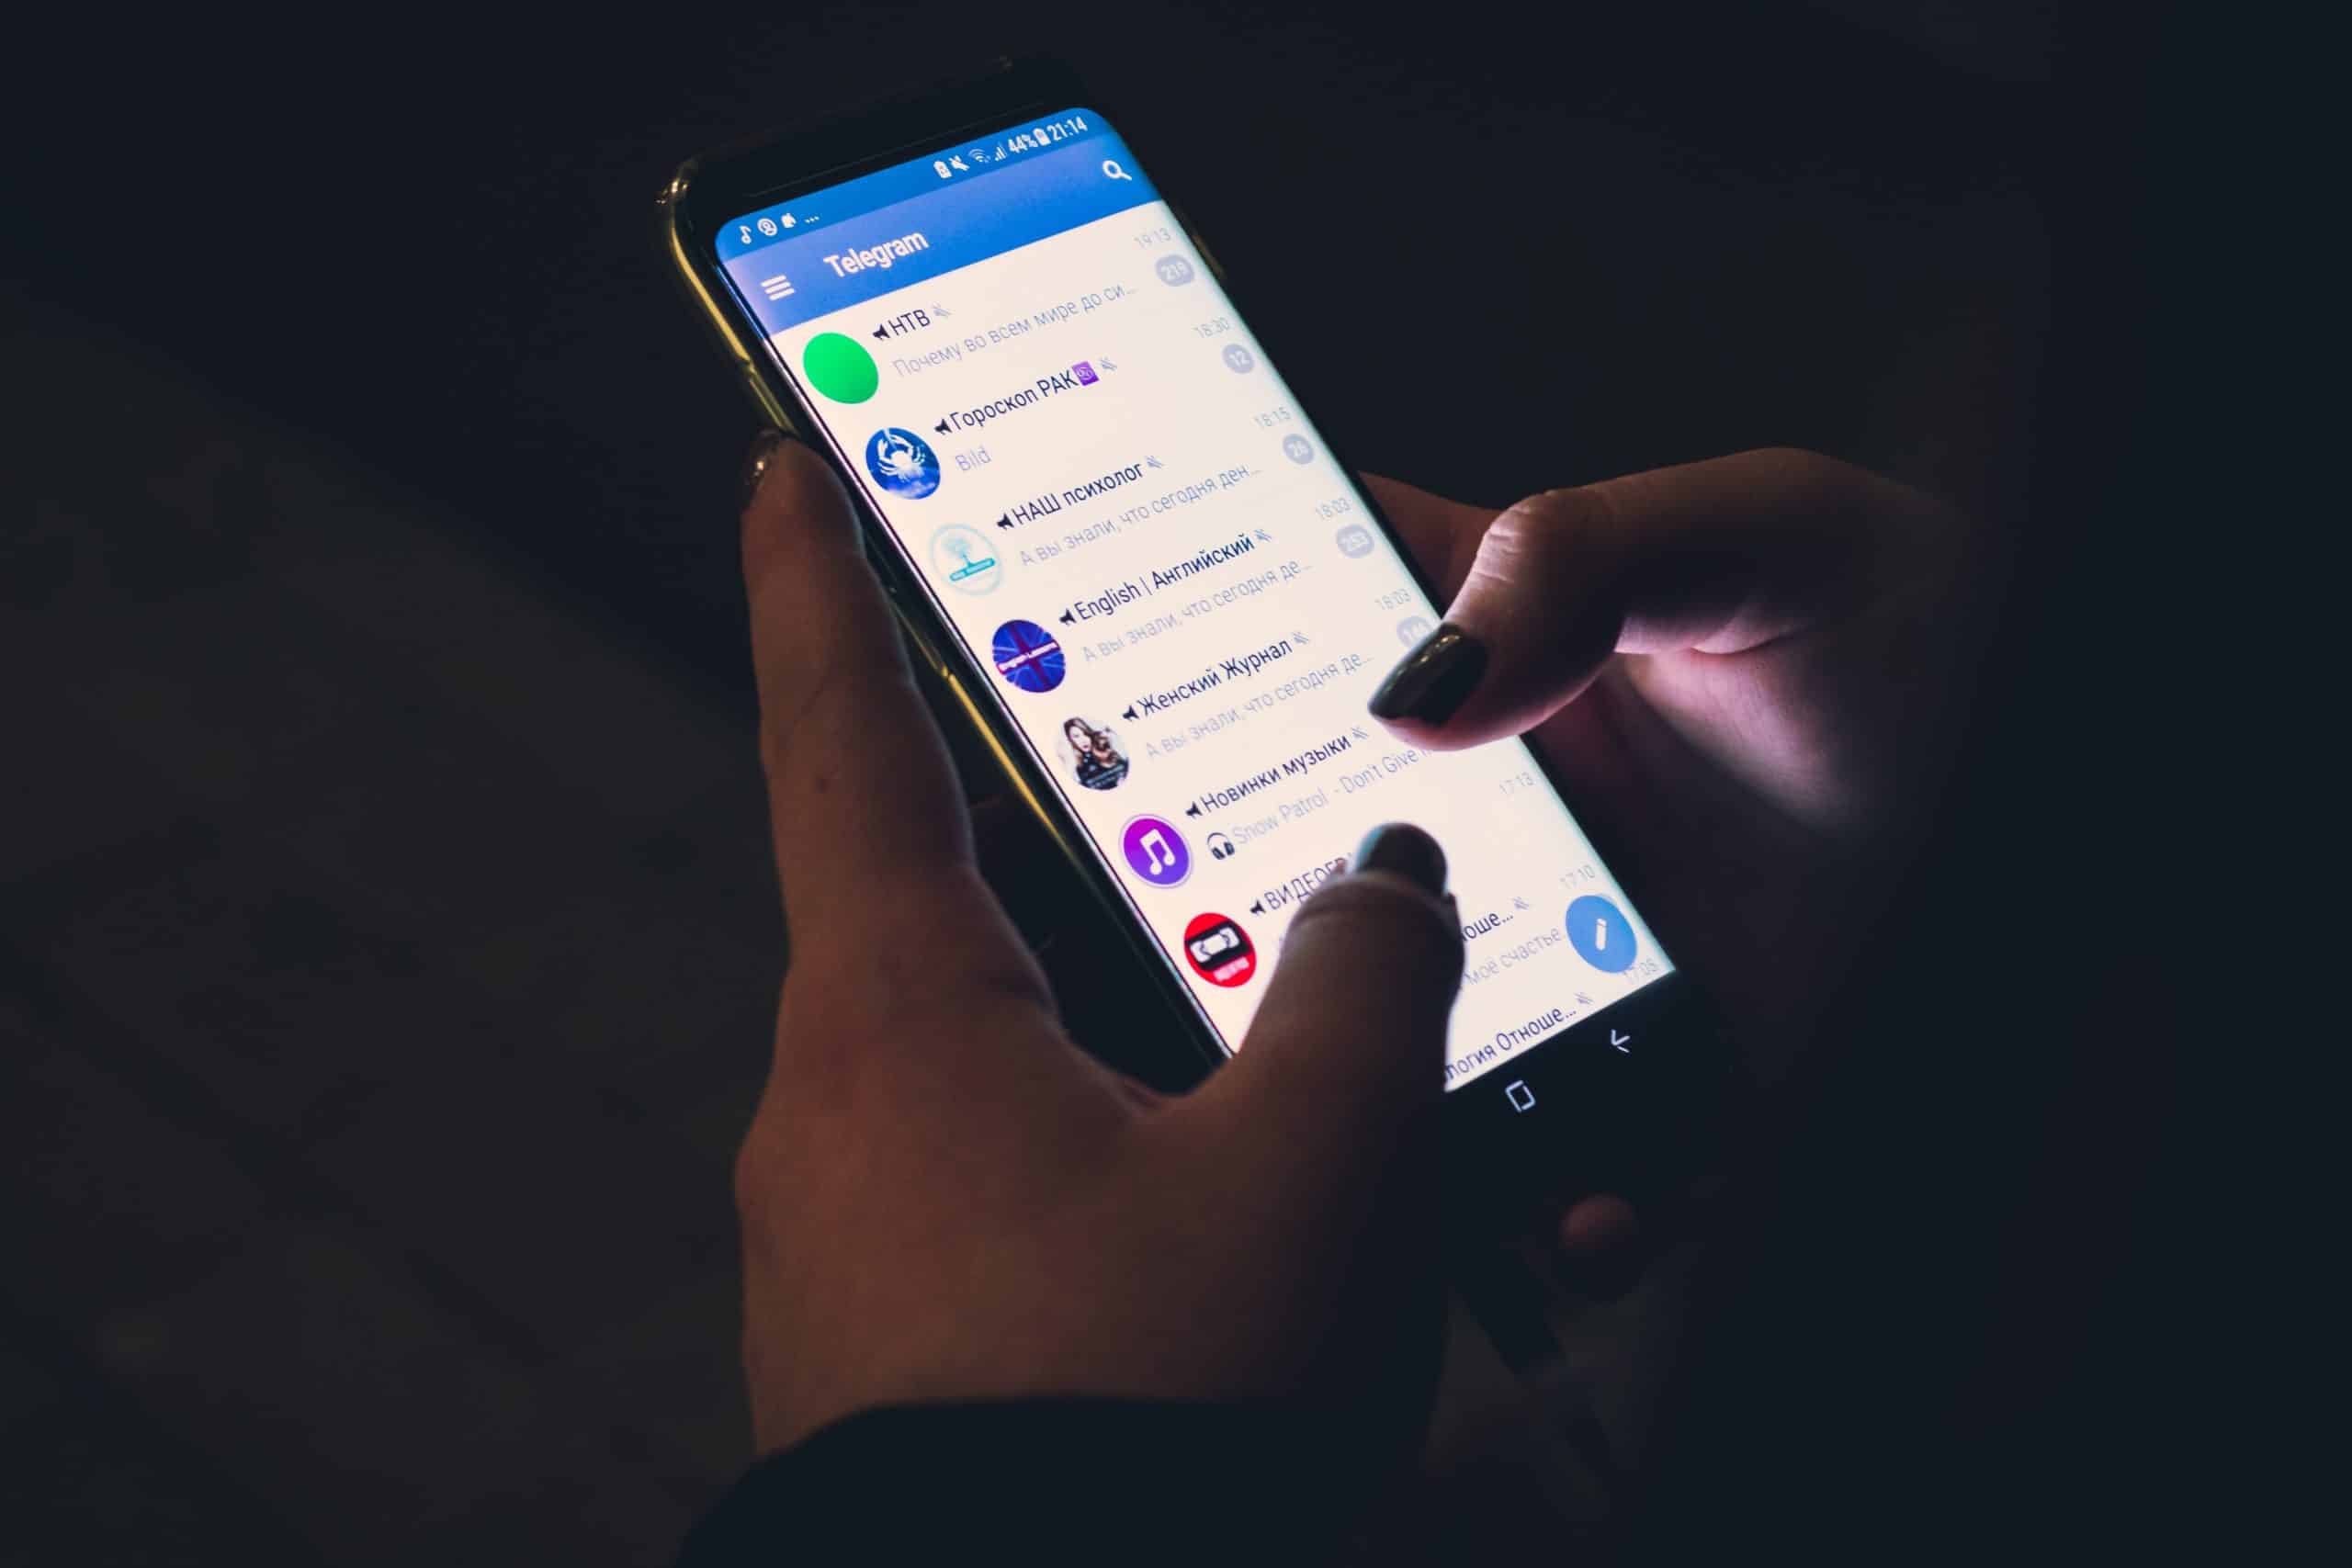 How to set up your privacy settings on the Telegram Messenger